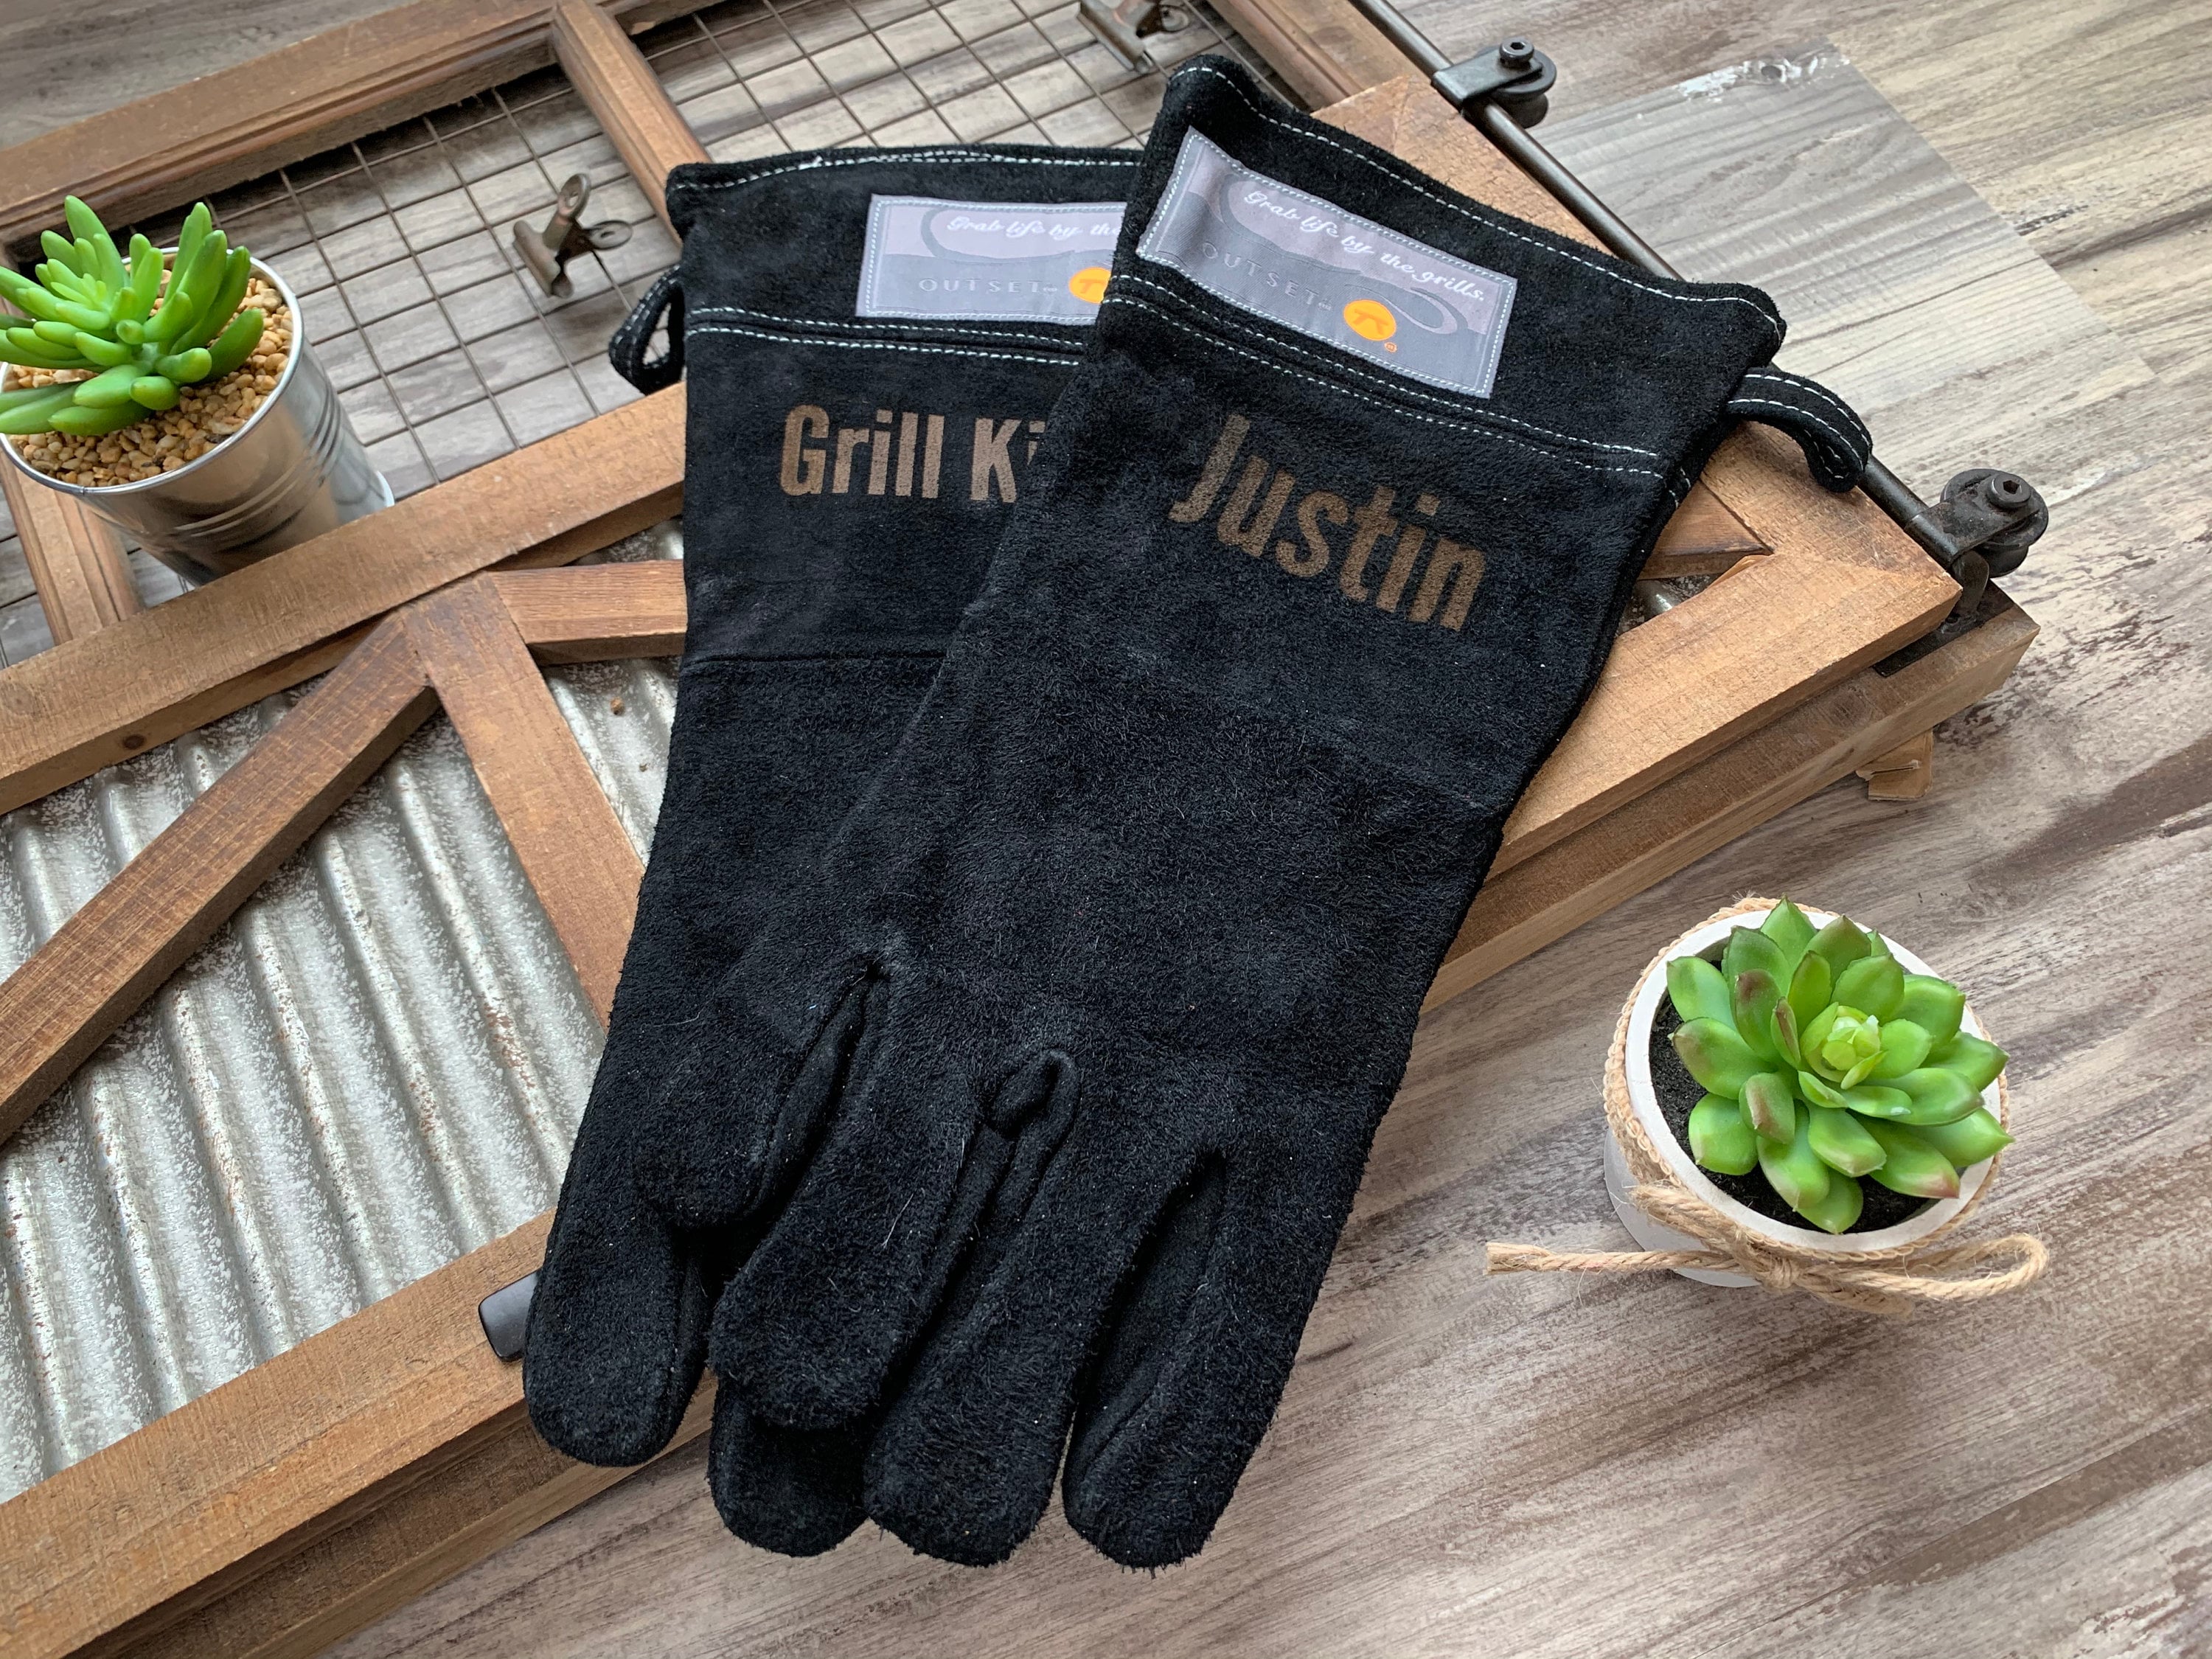 Large Grill Gloves for Men Best Gift for Men Personalized Grill